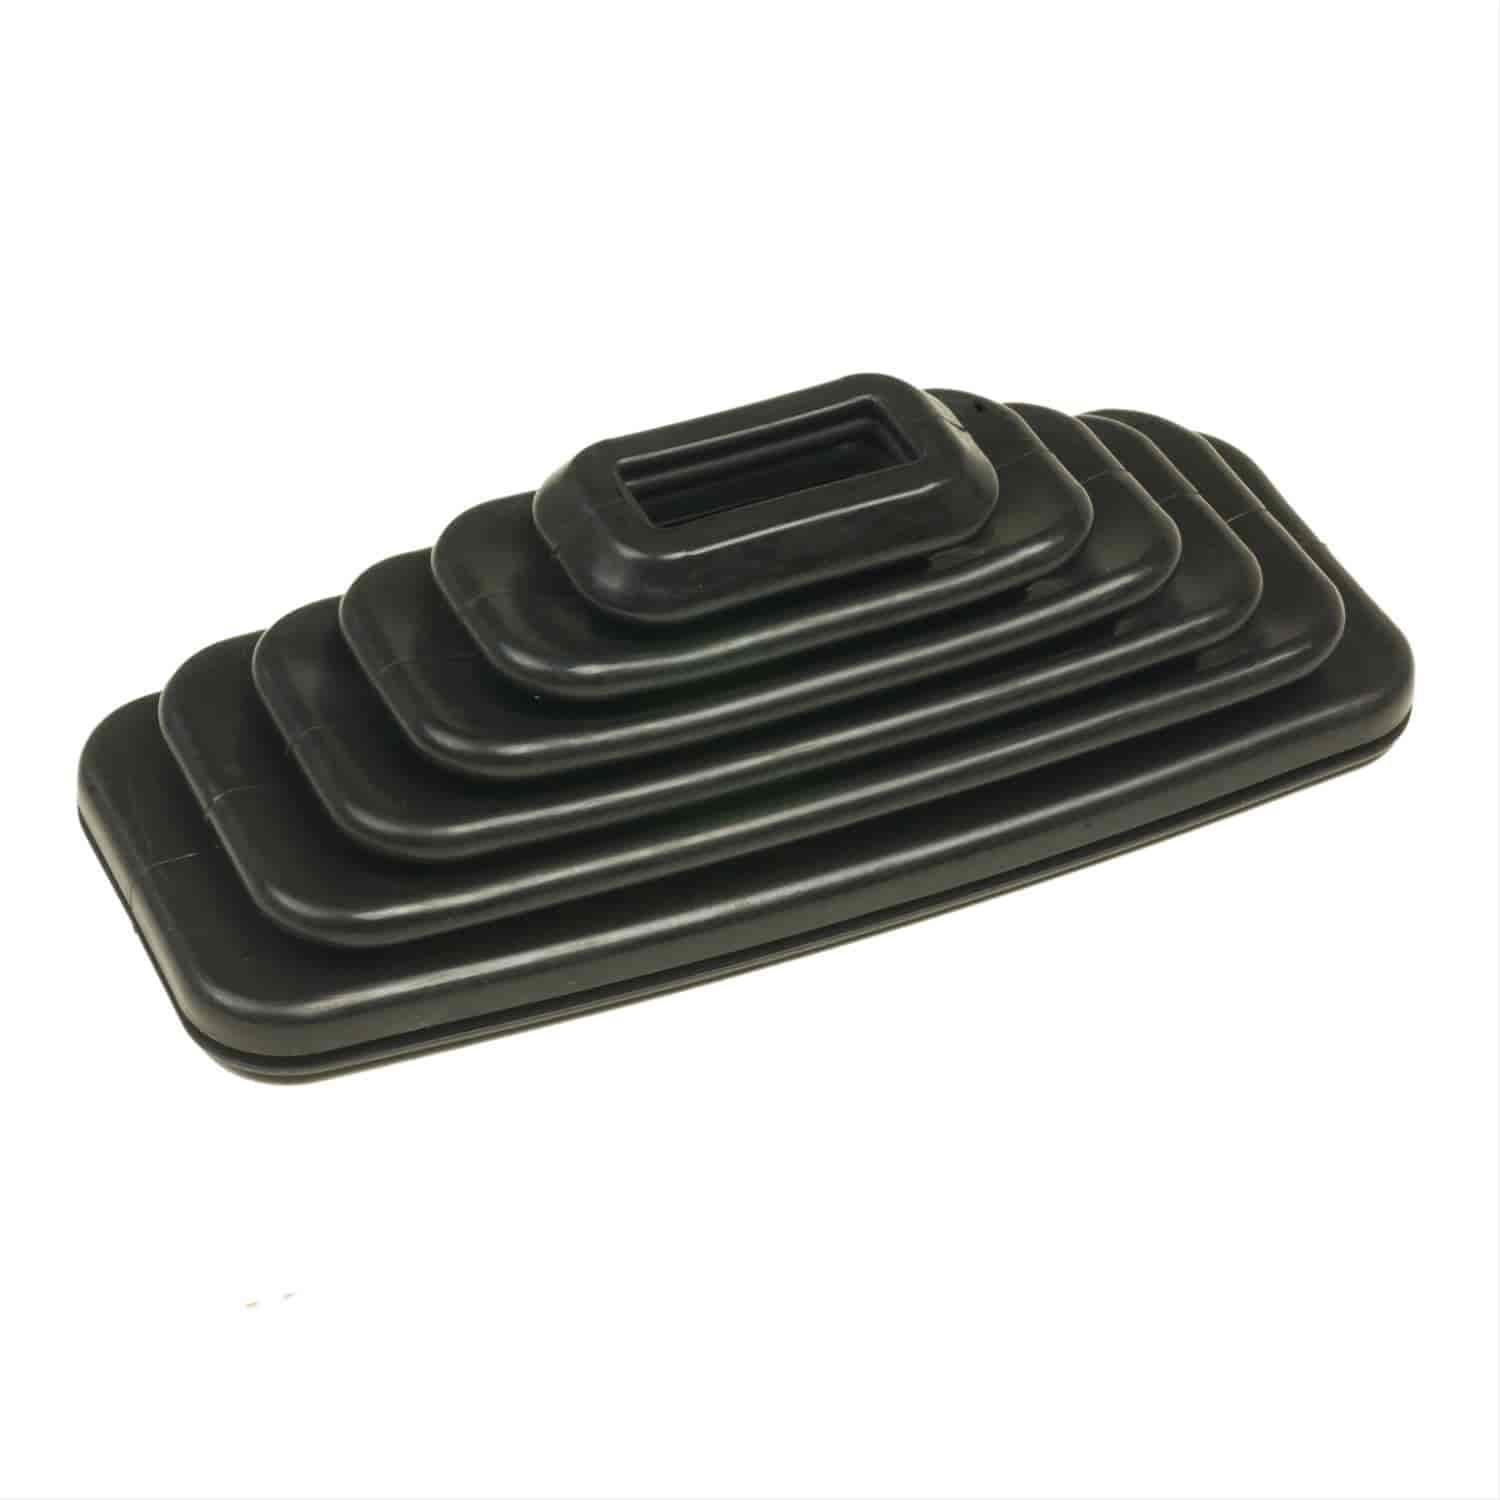 Replacement Shifter Boot For Use With Megashifter 130-80680, 130-80685, 130-80690, 130-80692 & 130-80694